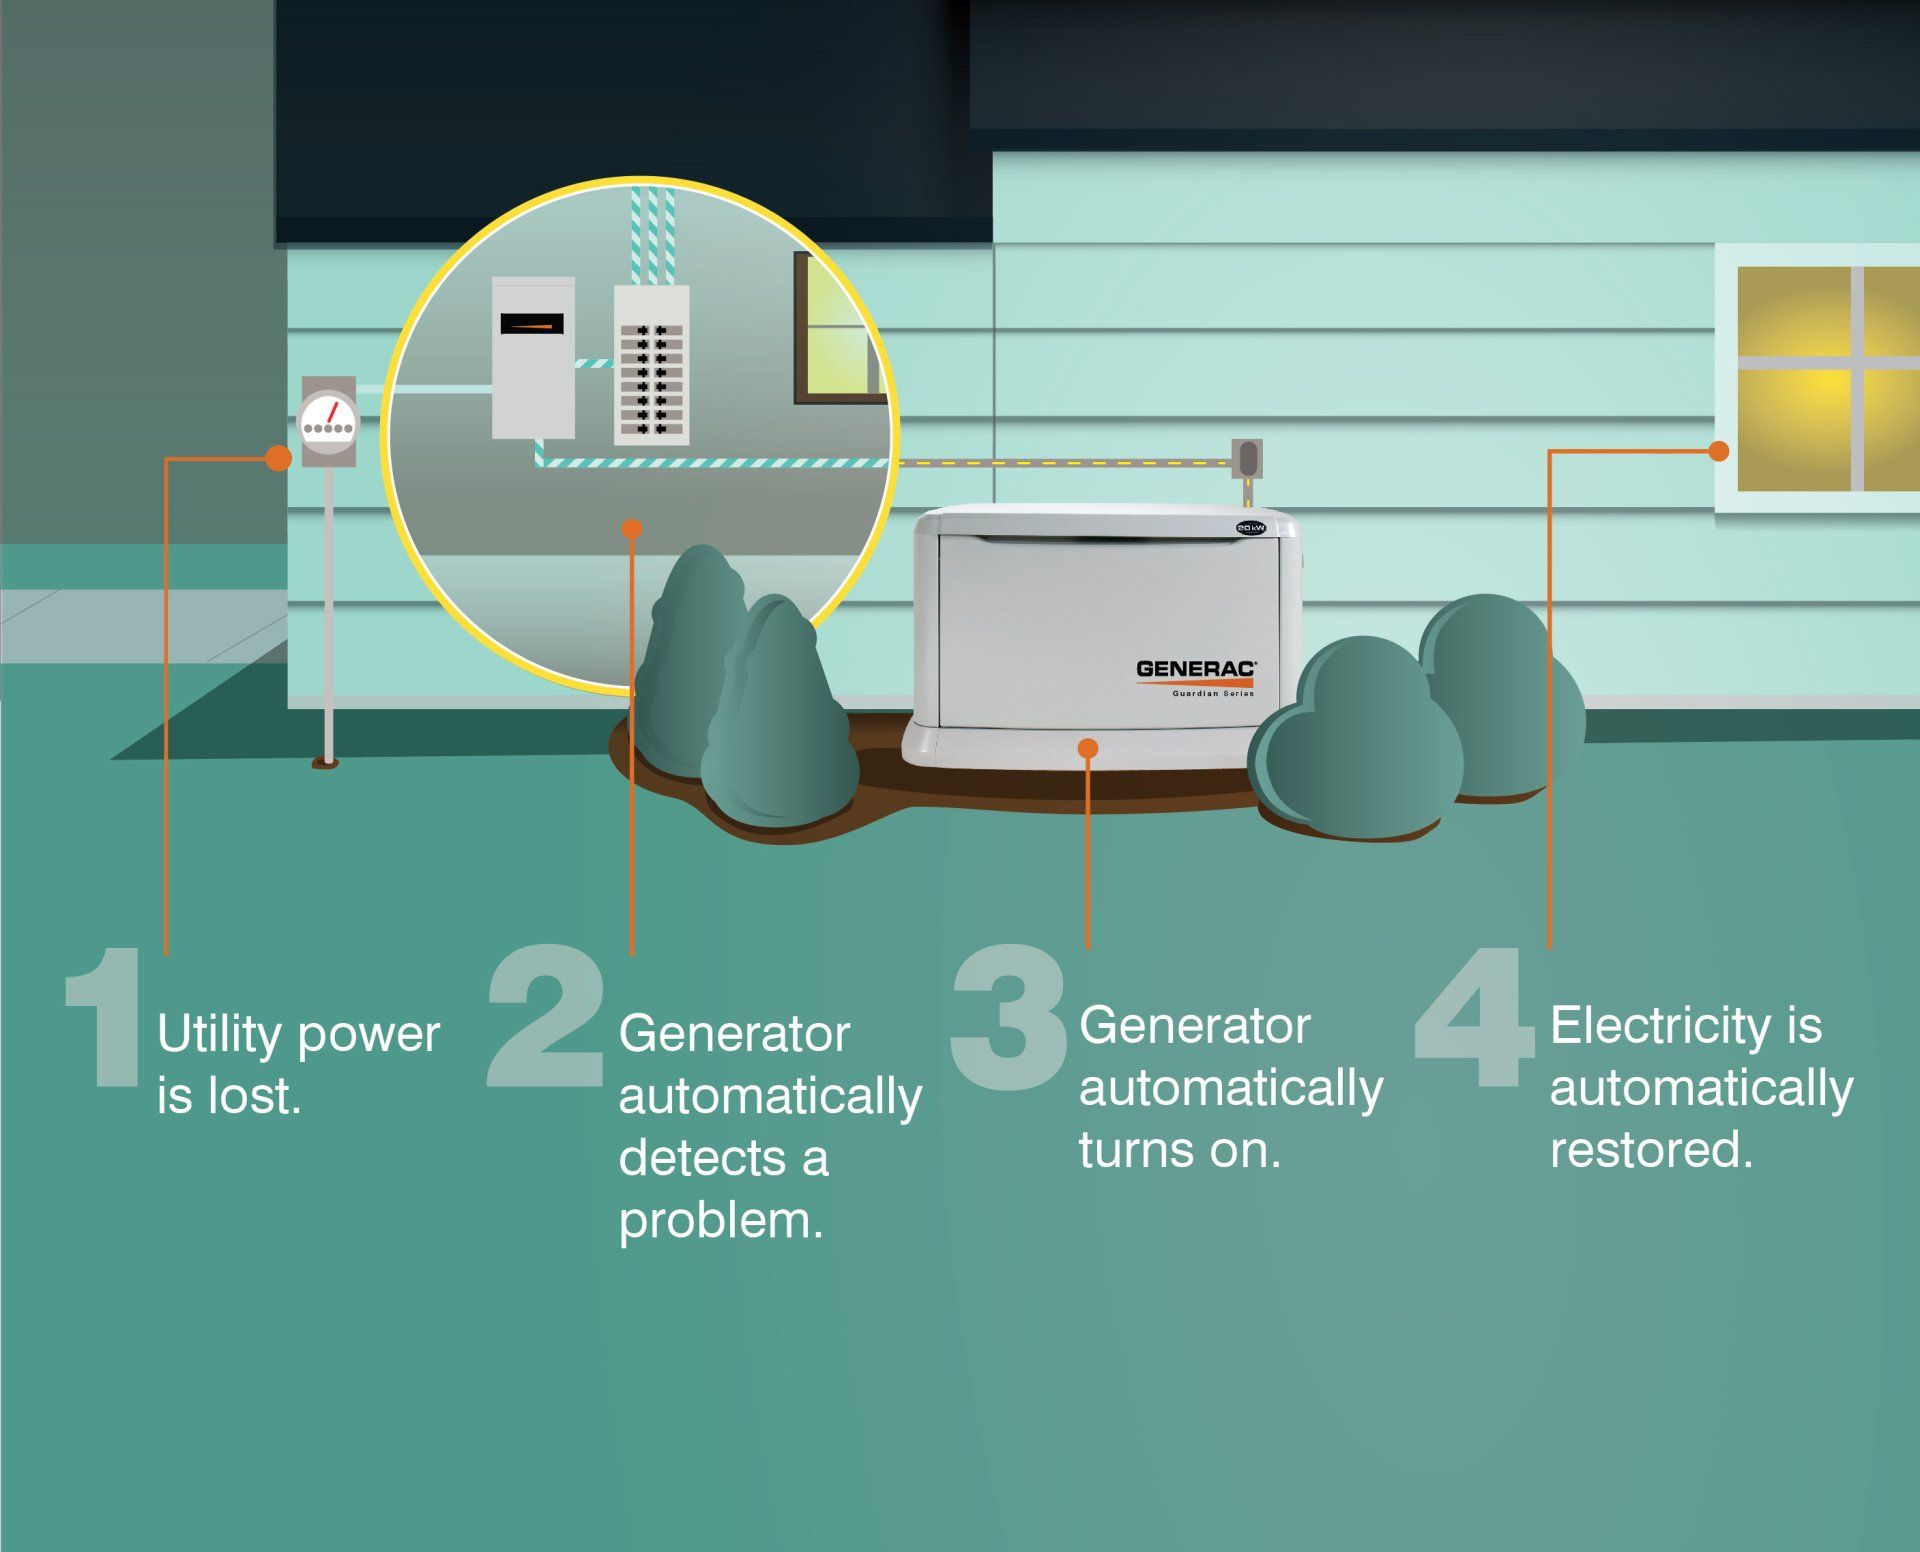 Ask Gorjanc: How does an electric standby generator work?